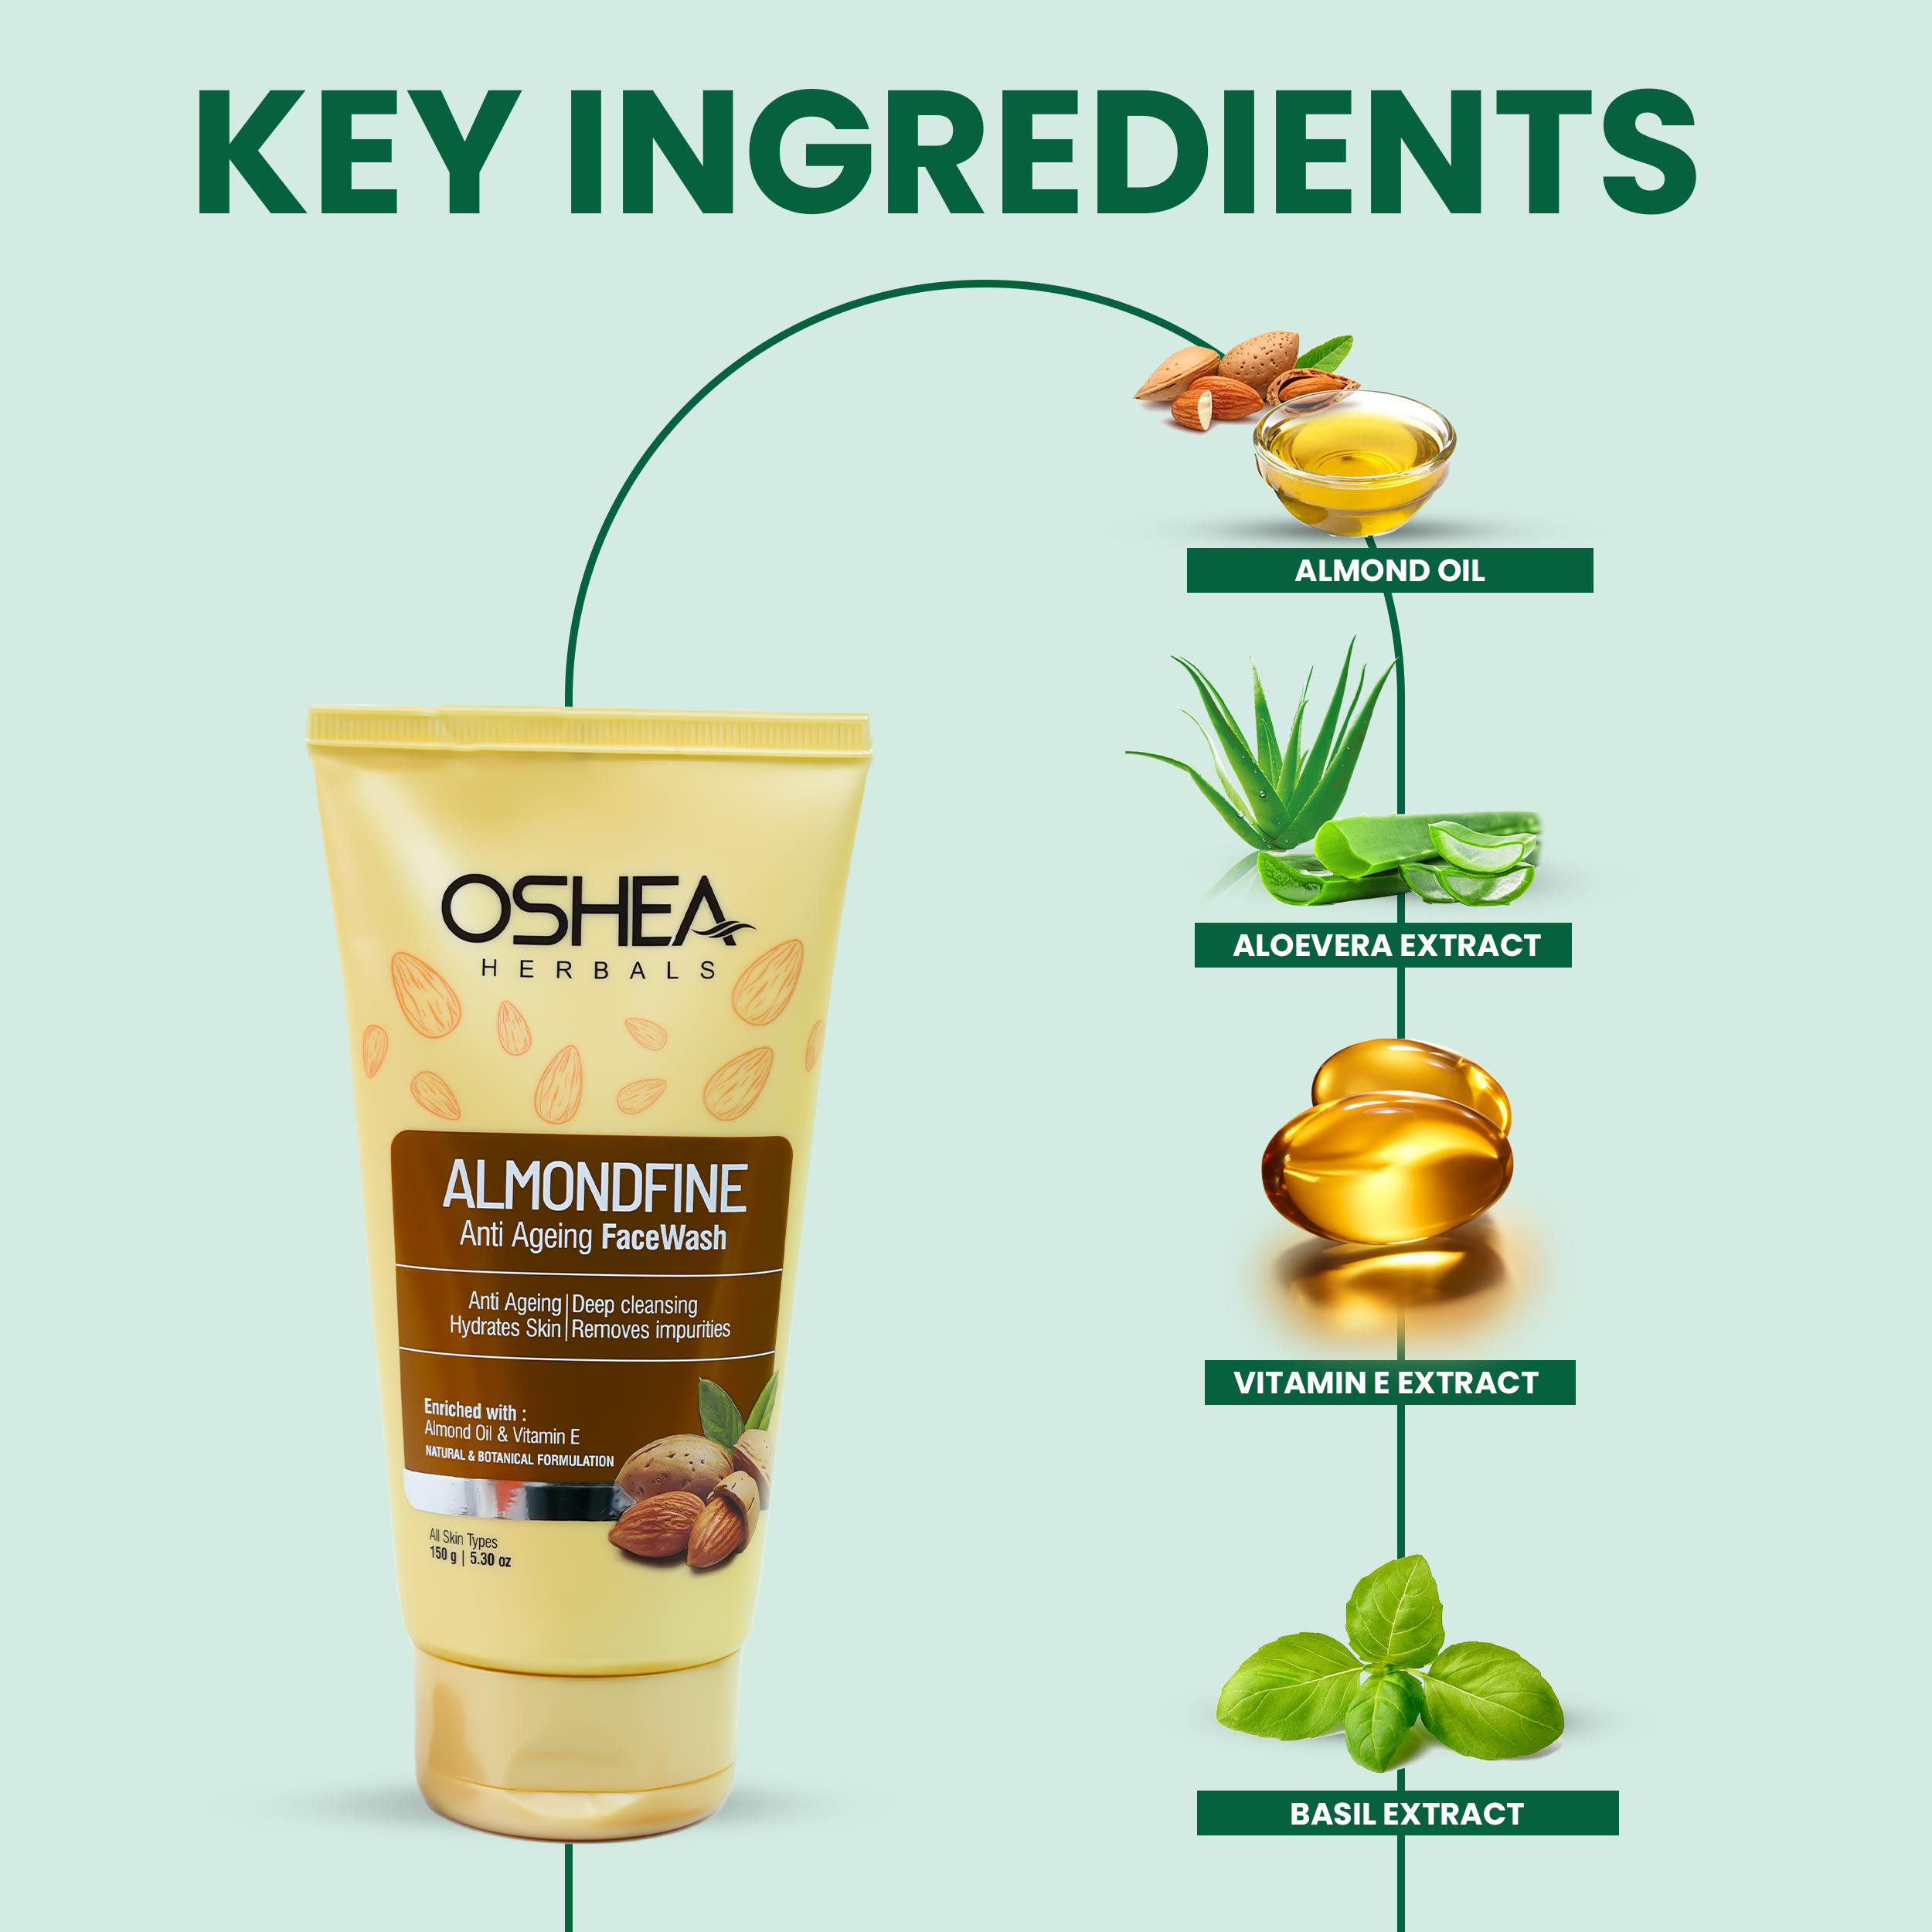 KeyI ngredients Almondfine Anti Ageing Face wash Oshea Herbals